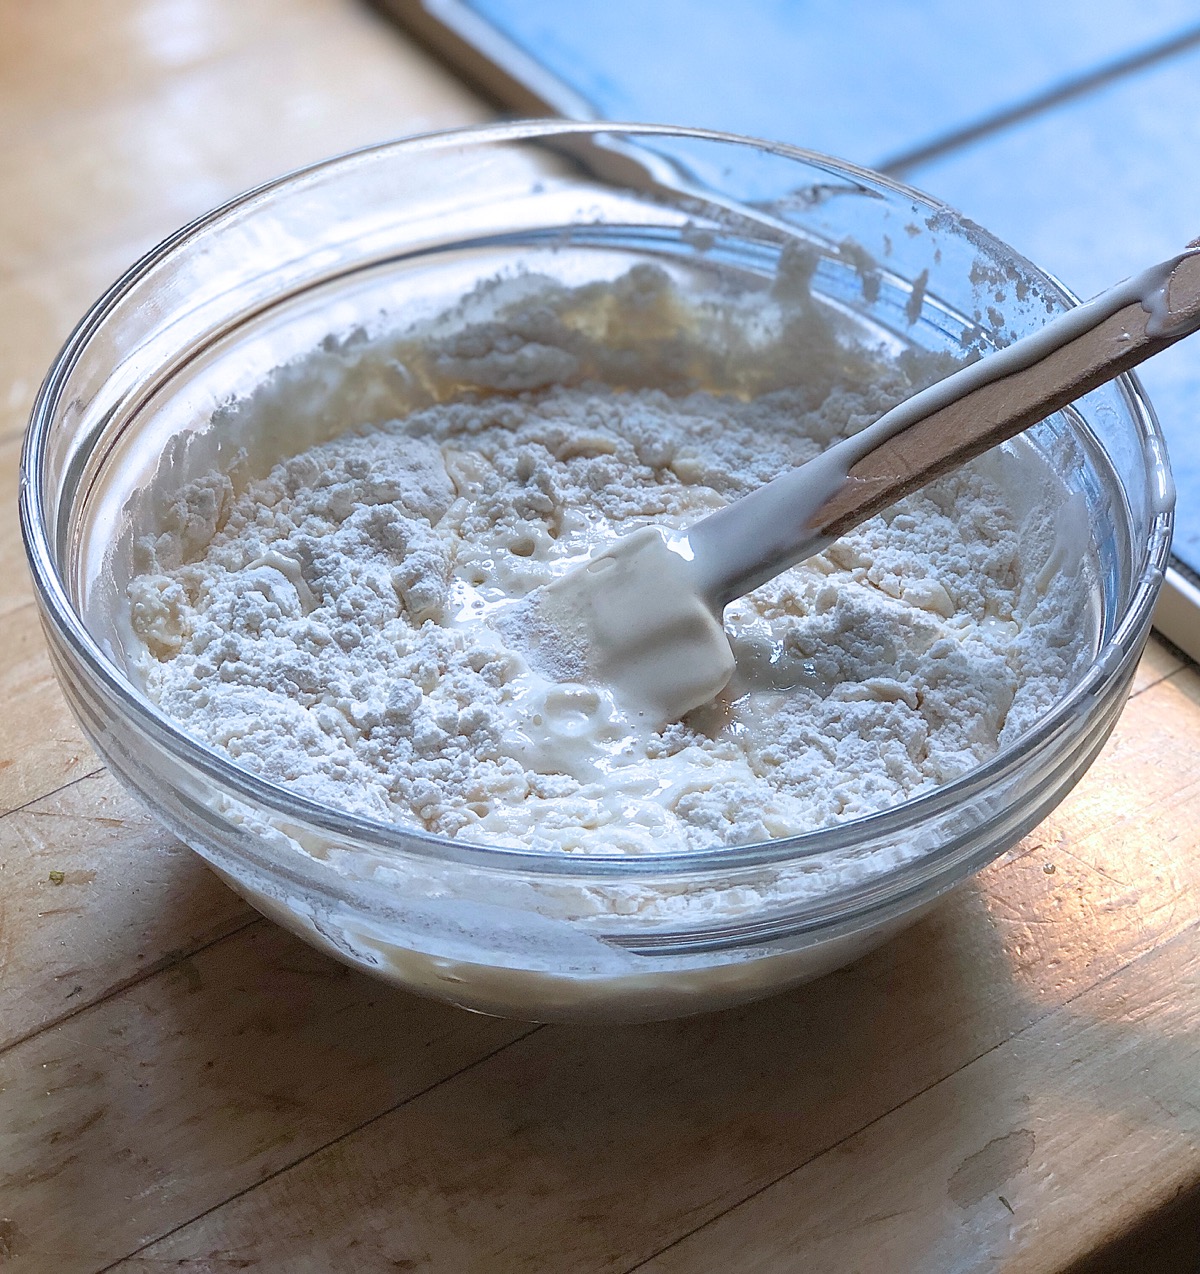 Sourdough starter in a bowl with flour and water, ready to be stirred together.